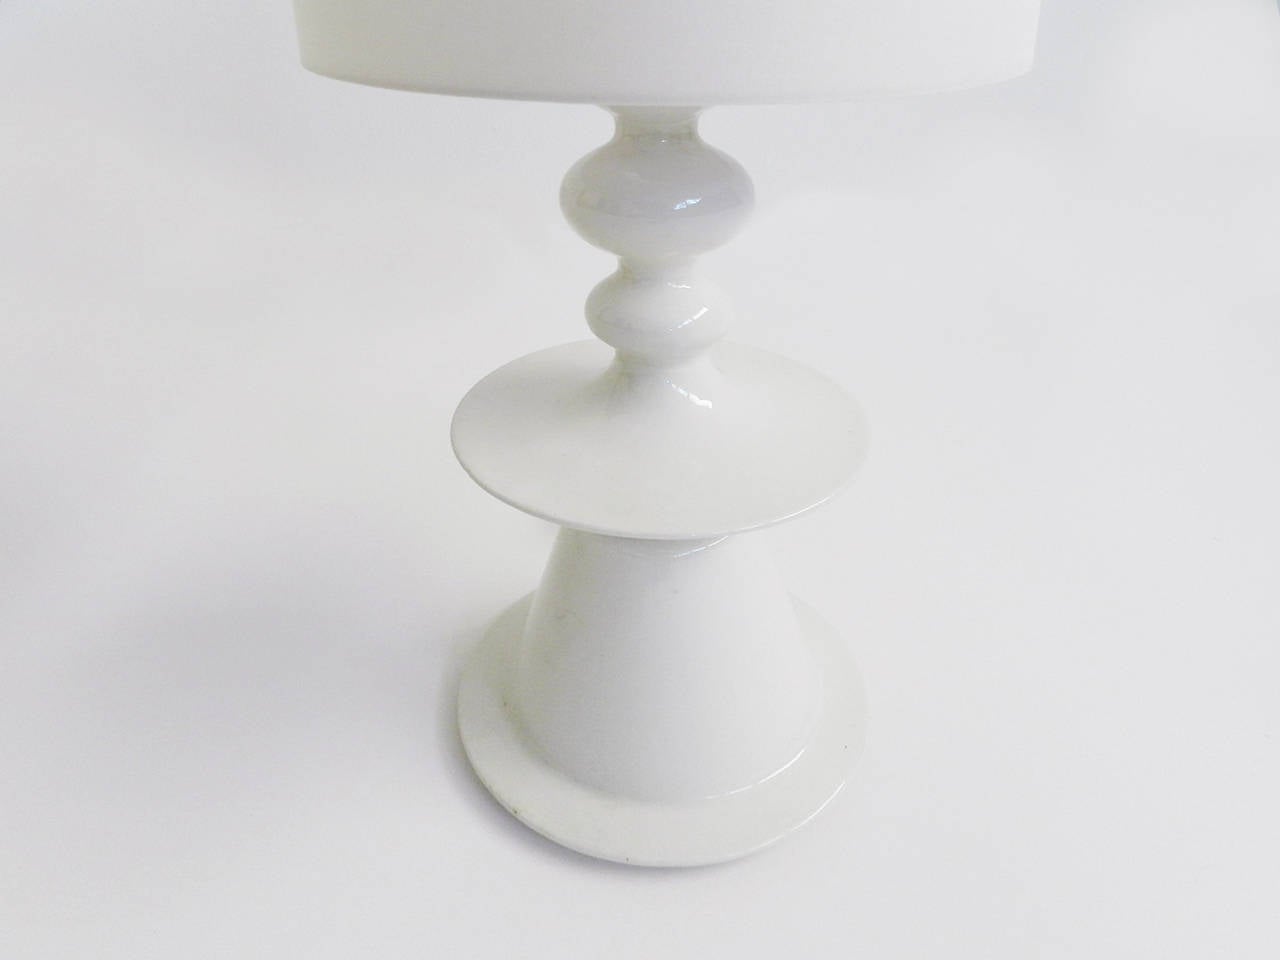 Ceramic table lamp by swiss ceramist Margrit Linck.
The shade has been newly made.